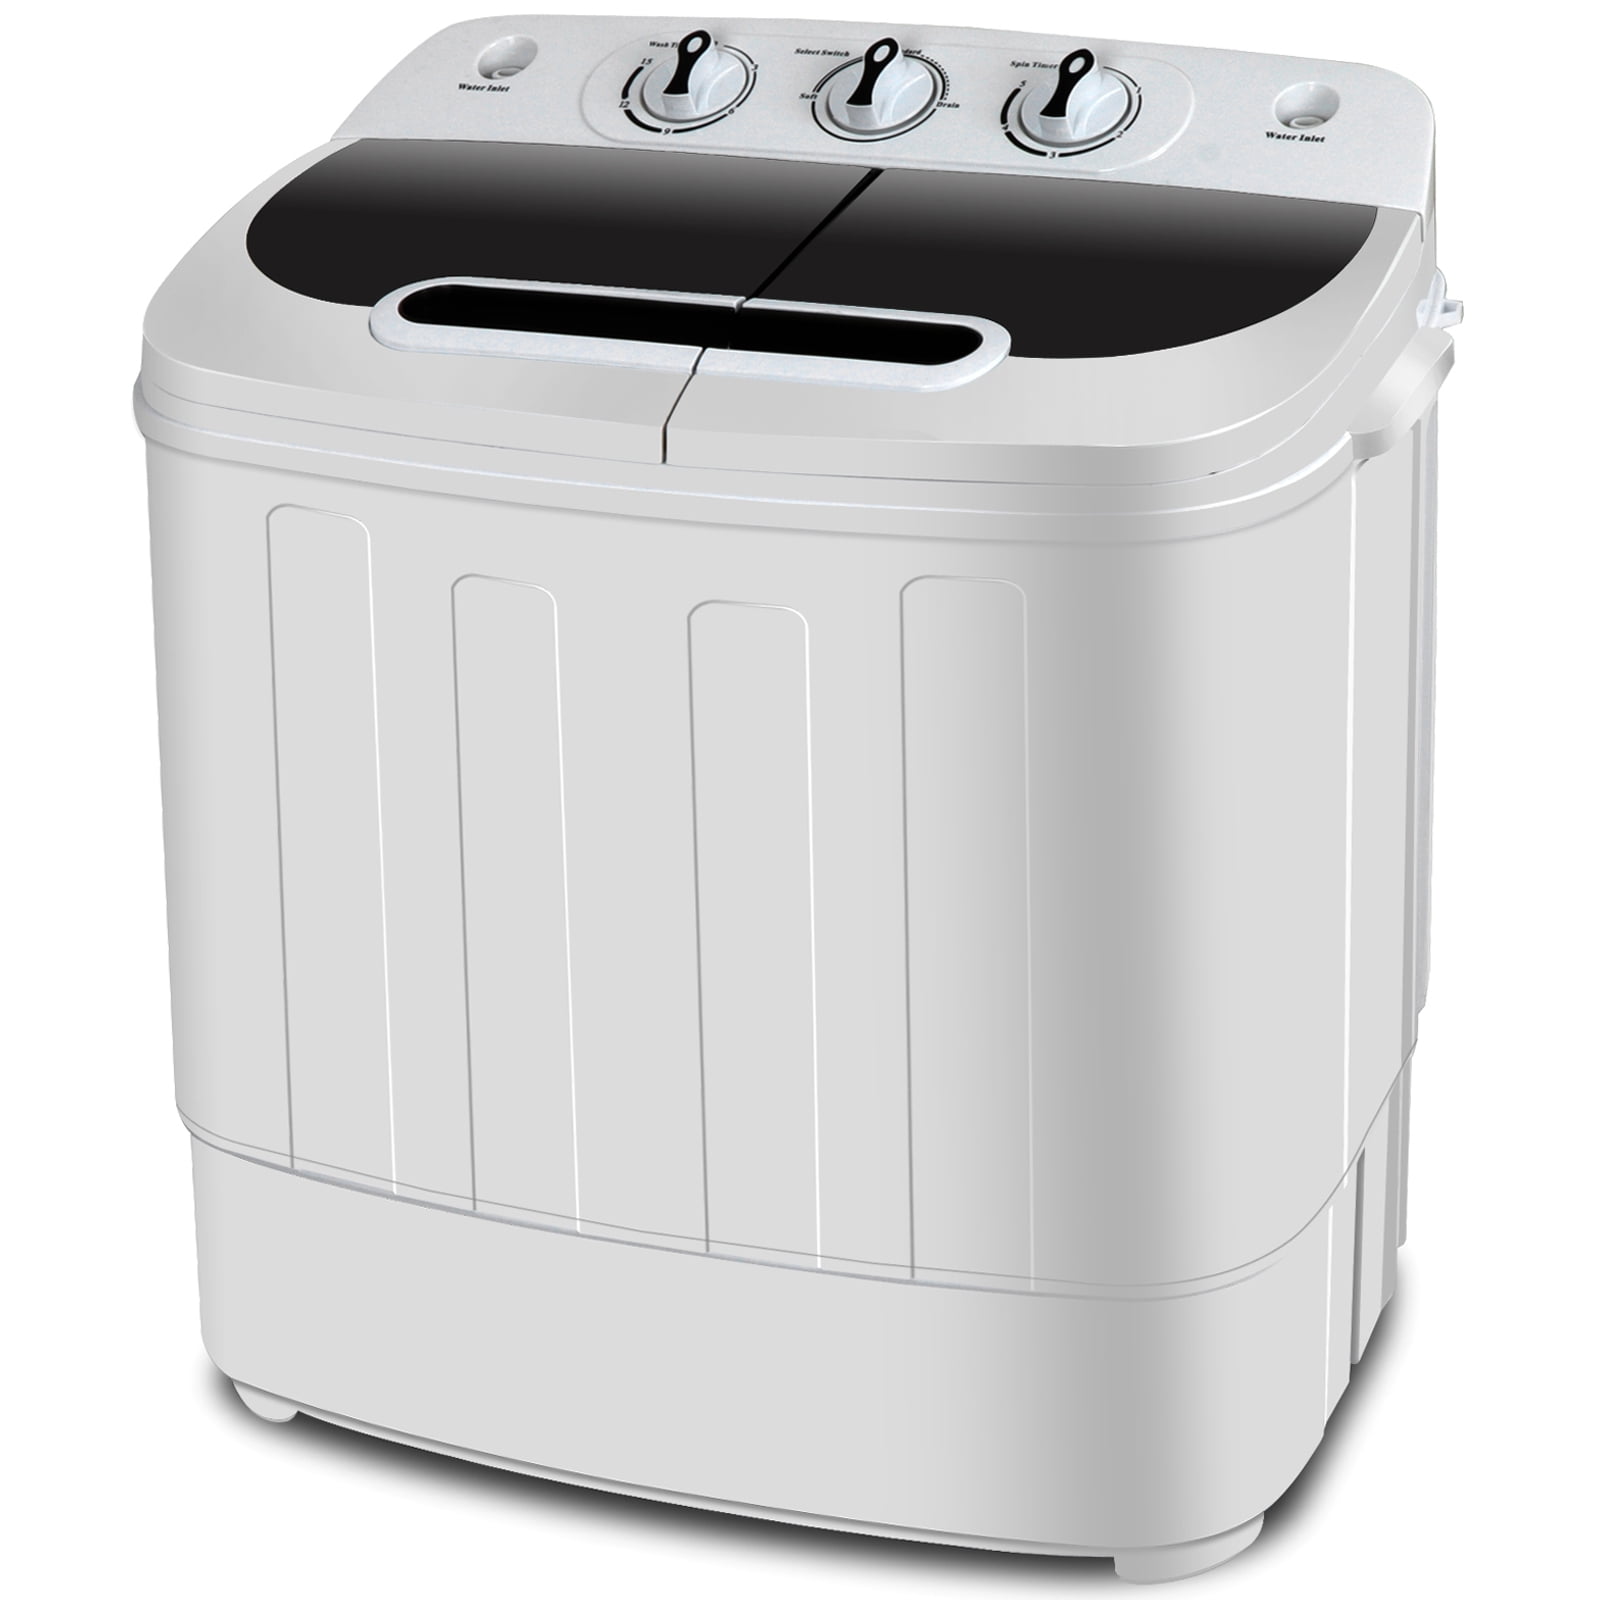 Best Choice Products Portable Mini Twin Tub Compact Washing Machine w/Spin Dry Cycle White/Blue 